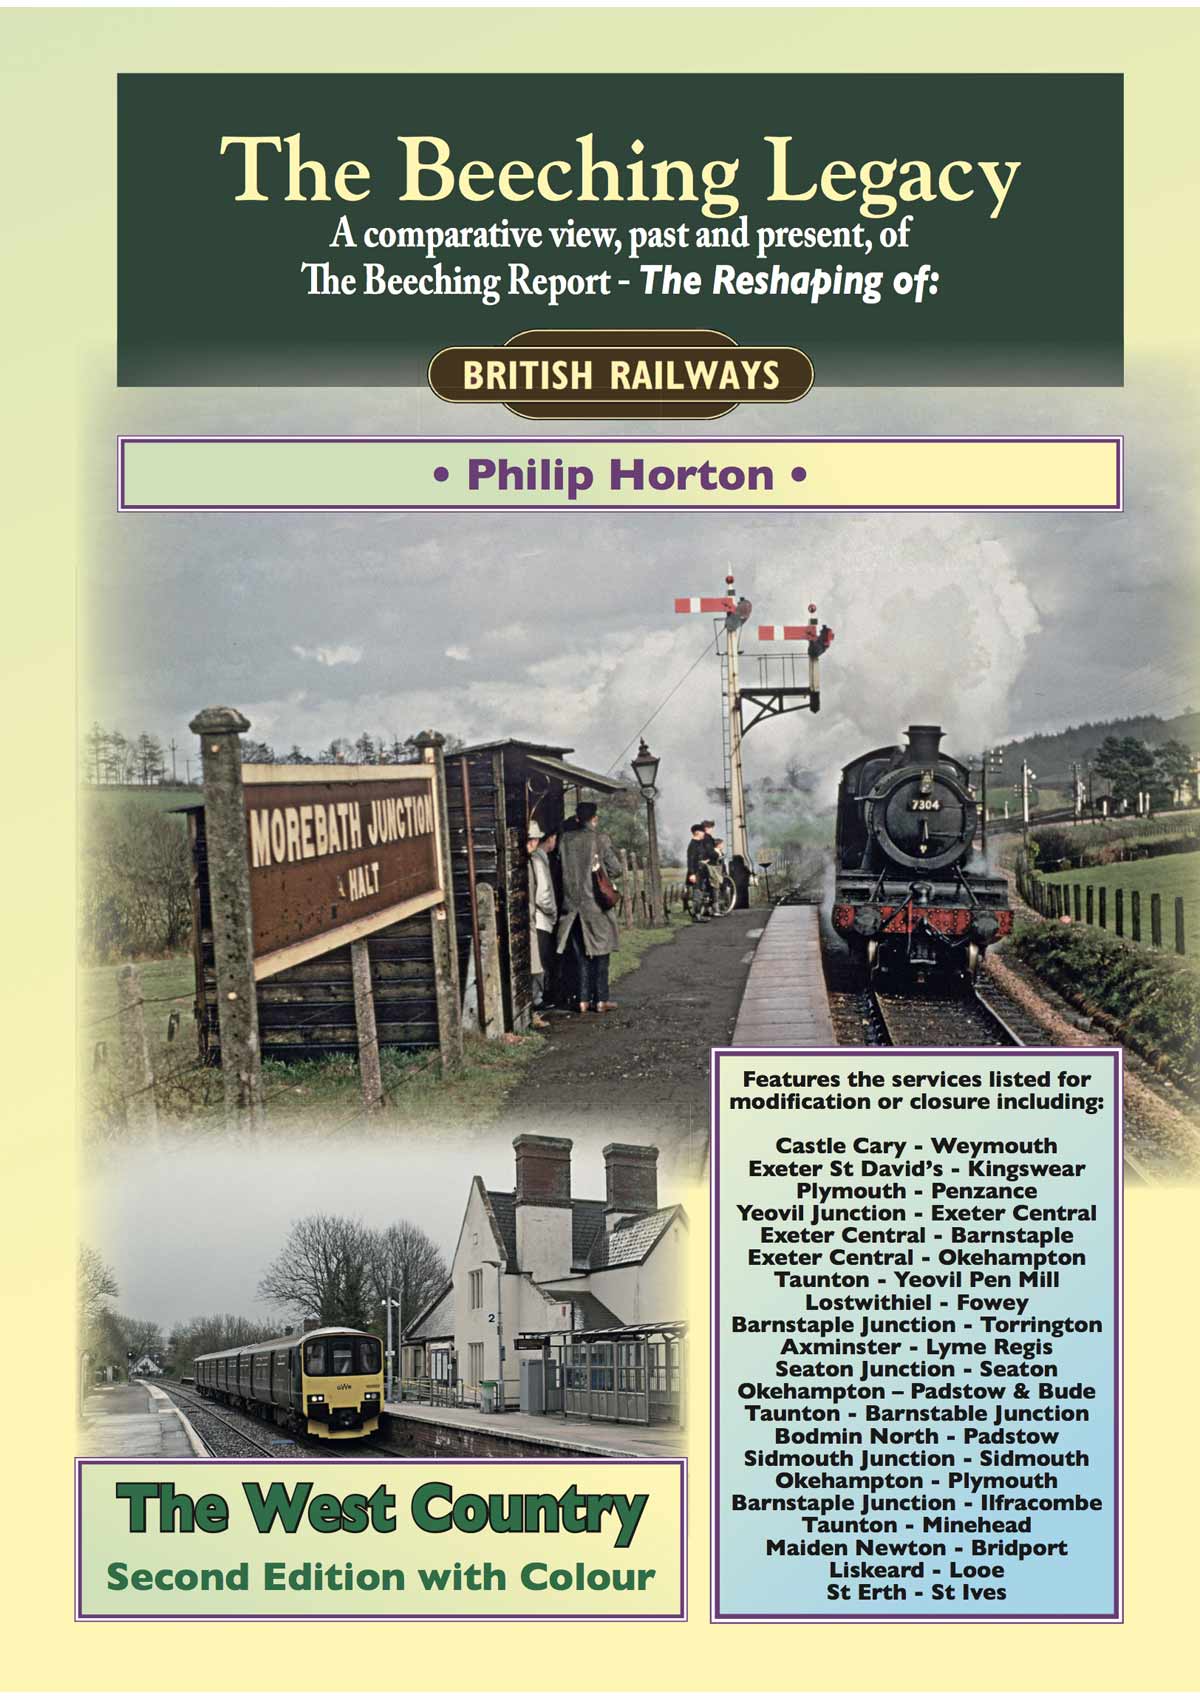 5461 The Beeching Legacy THE WEST COUNTRY Expanded second edition